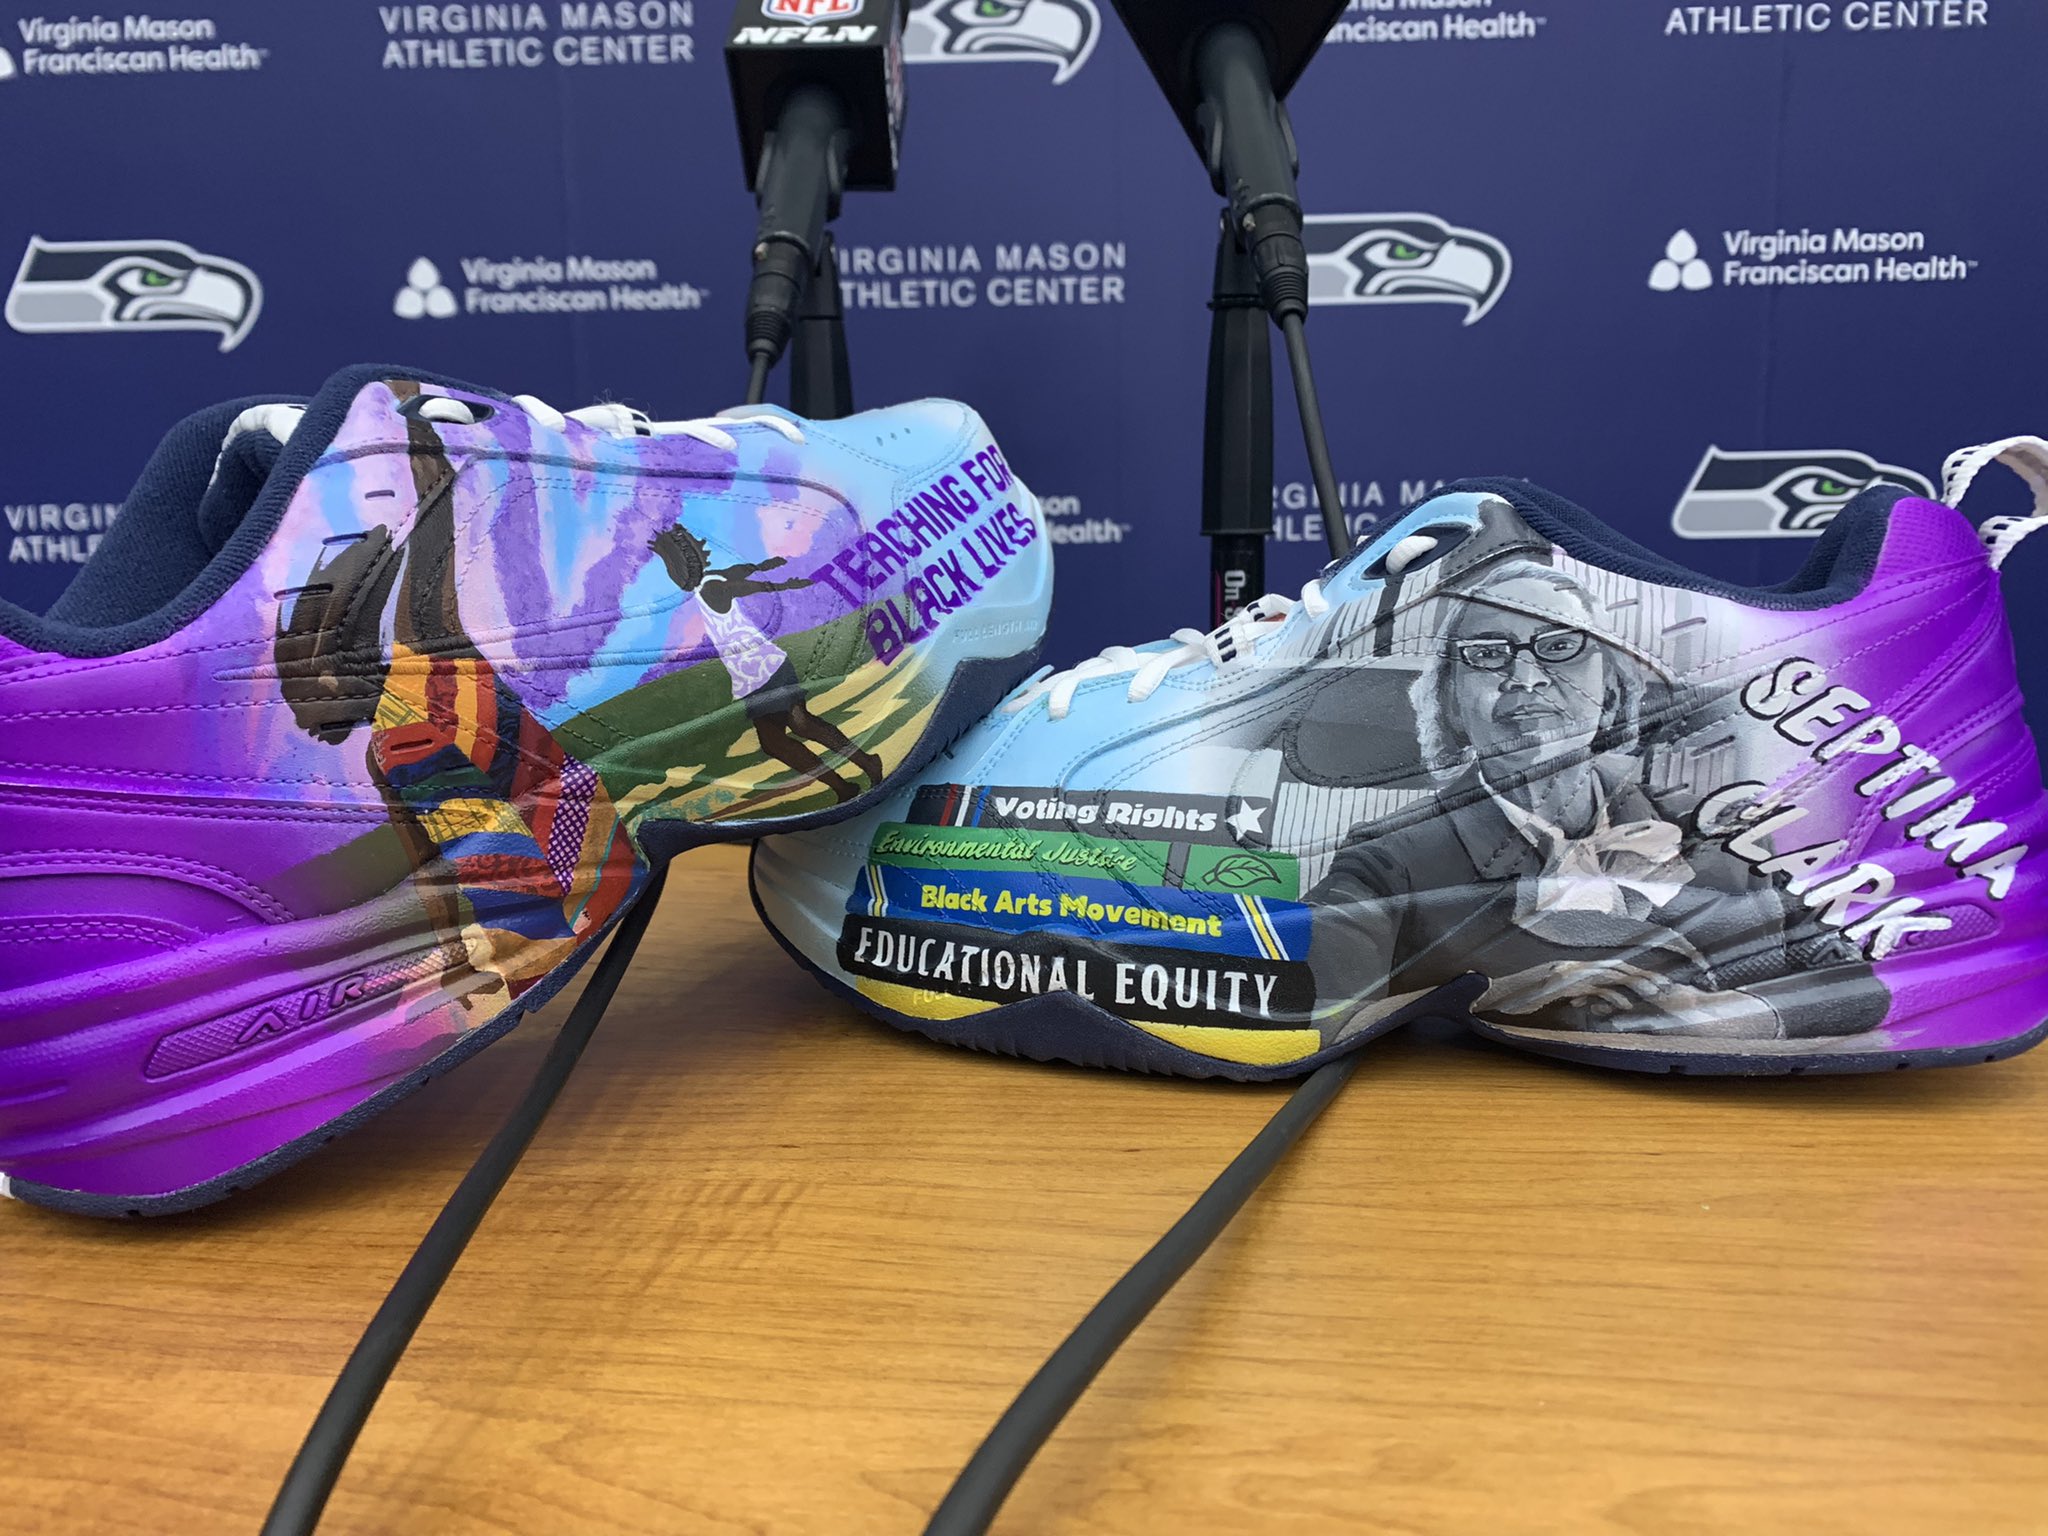 Gregg Bell on X: "The shoes Pete Carroll will wear Sunday at Rams are for  Teaching for Black Lives, educational program started in Seattle at  Garfield High School. @macklemore asked Carroll, Seahawks